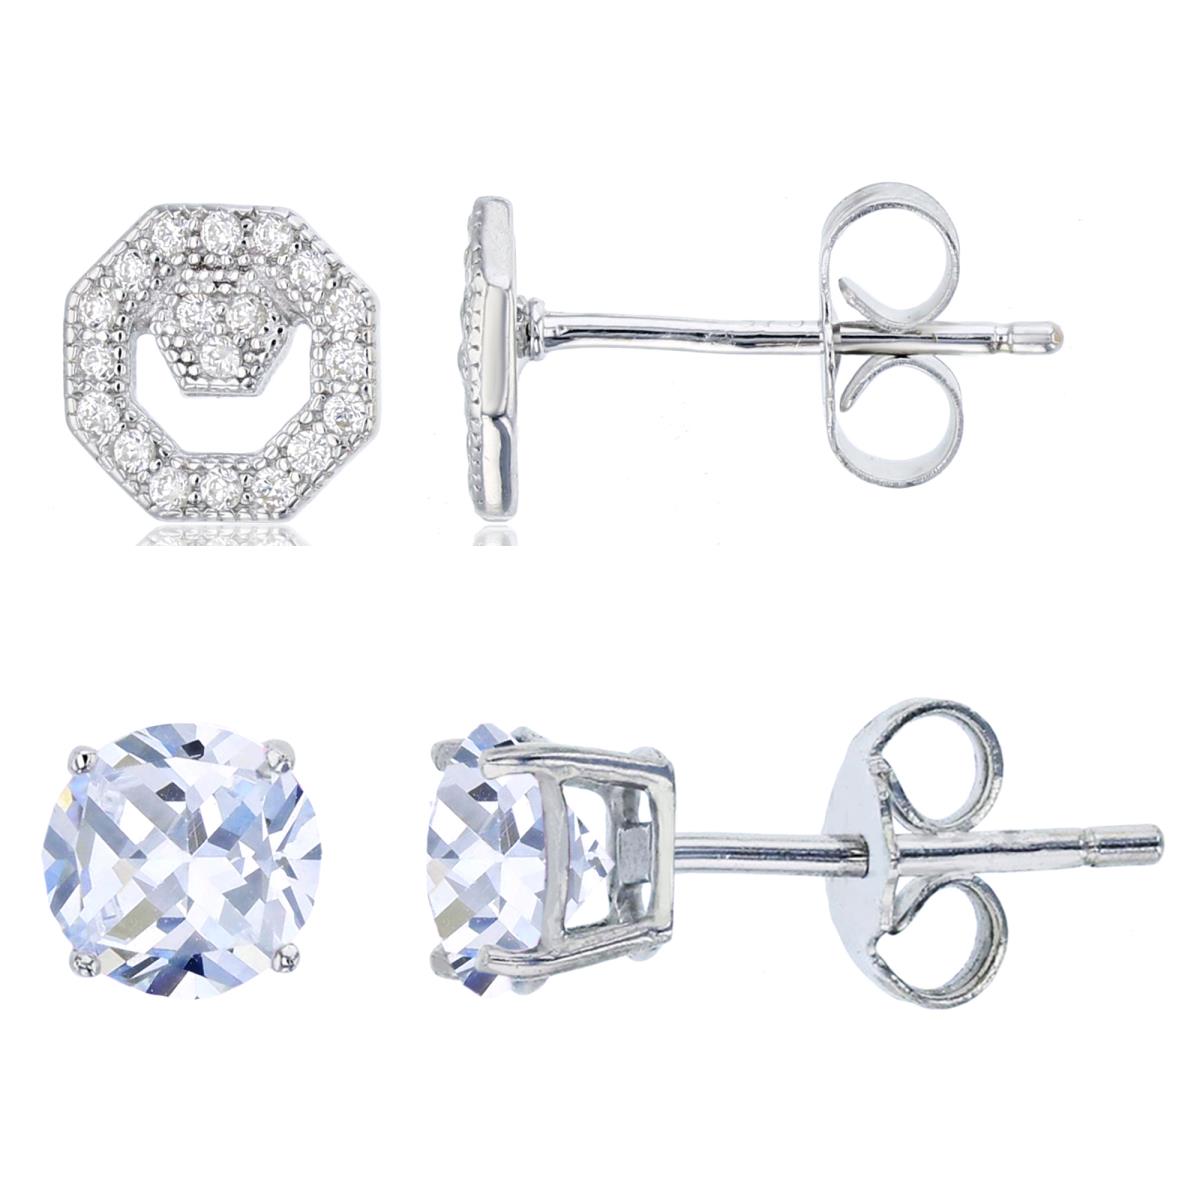 Sterling Silver Micropave Petite Octagon & 4.00mm Round Solitaire Stud Earring Set